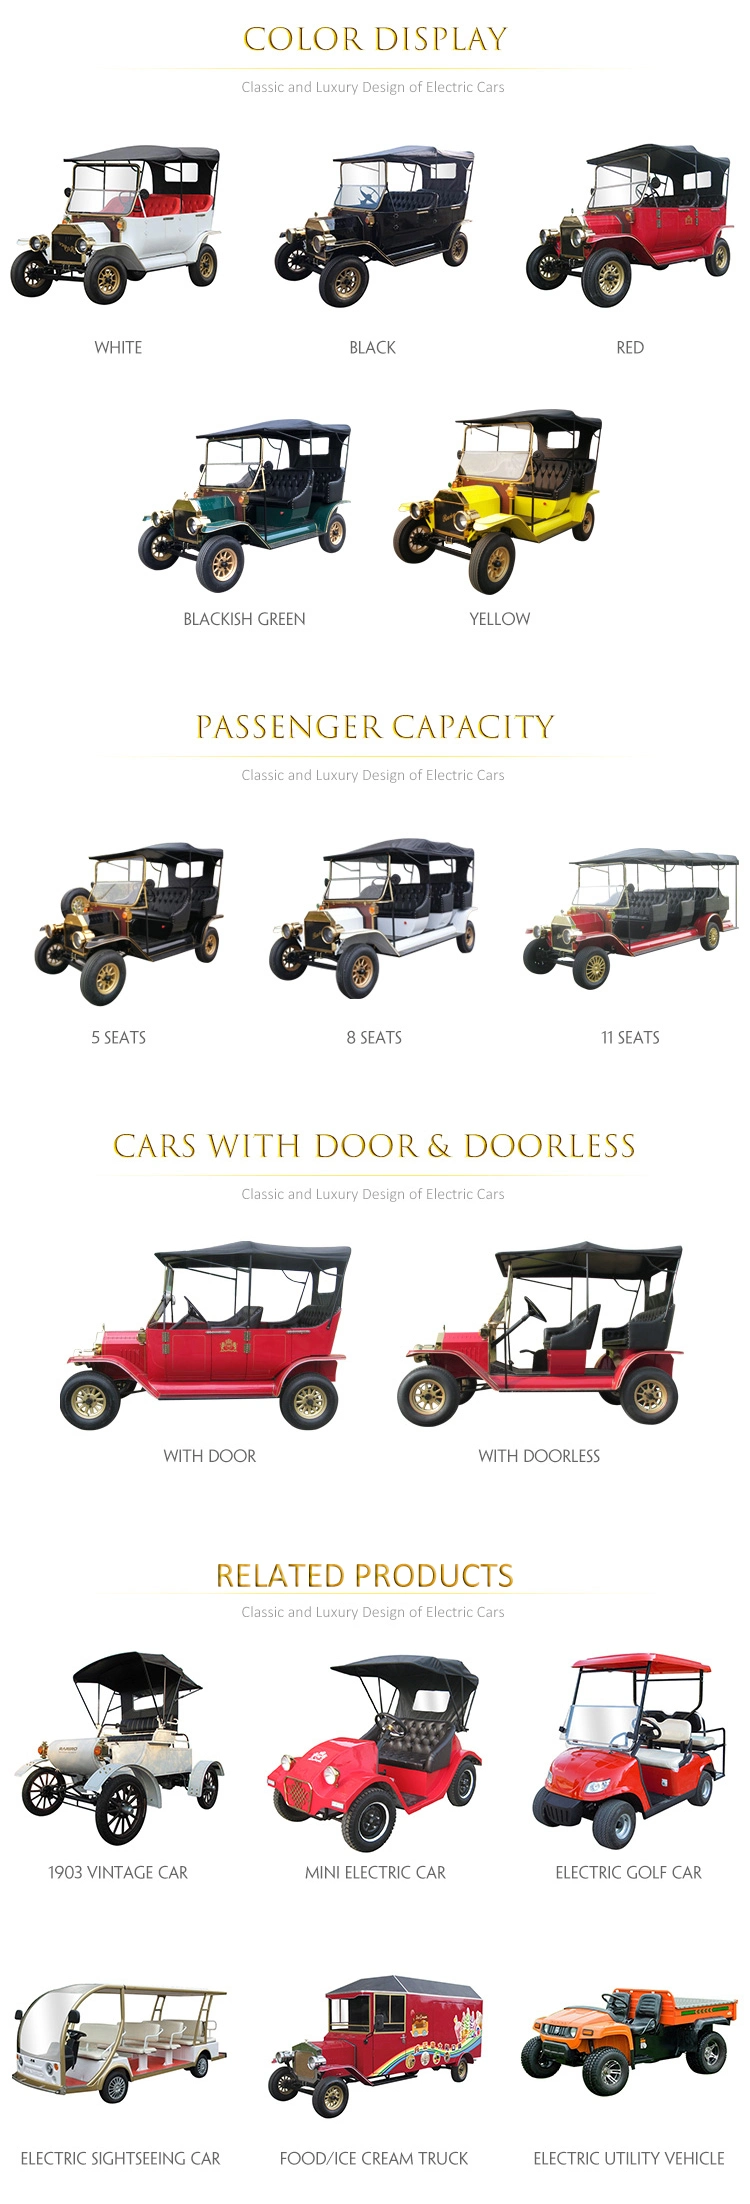 Electric Carts High Endurance Mileage Golf Carts in Red Golf Vehicle